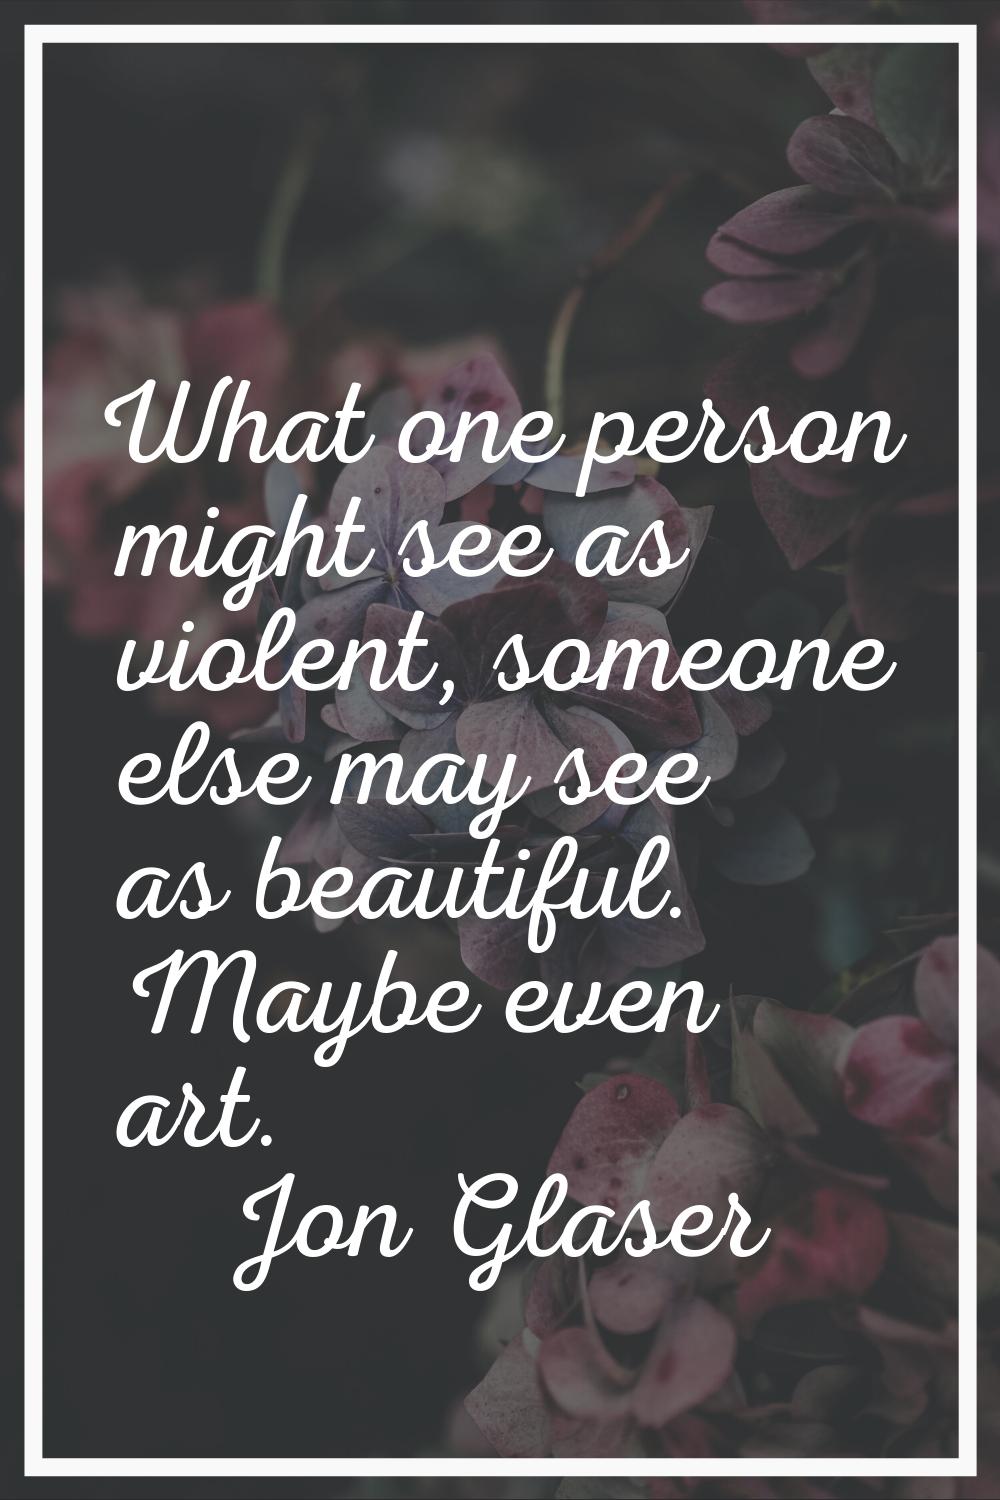 What one person might see as violent, someone else may see as beautiful. Maybe even art.